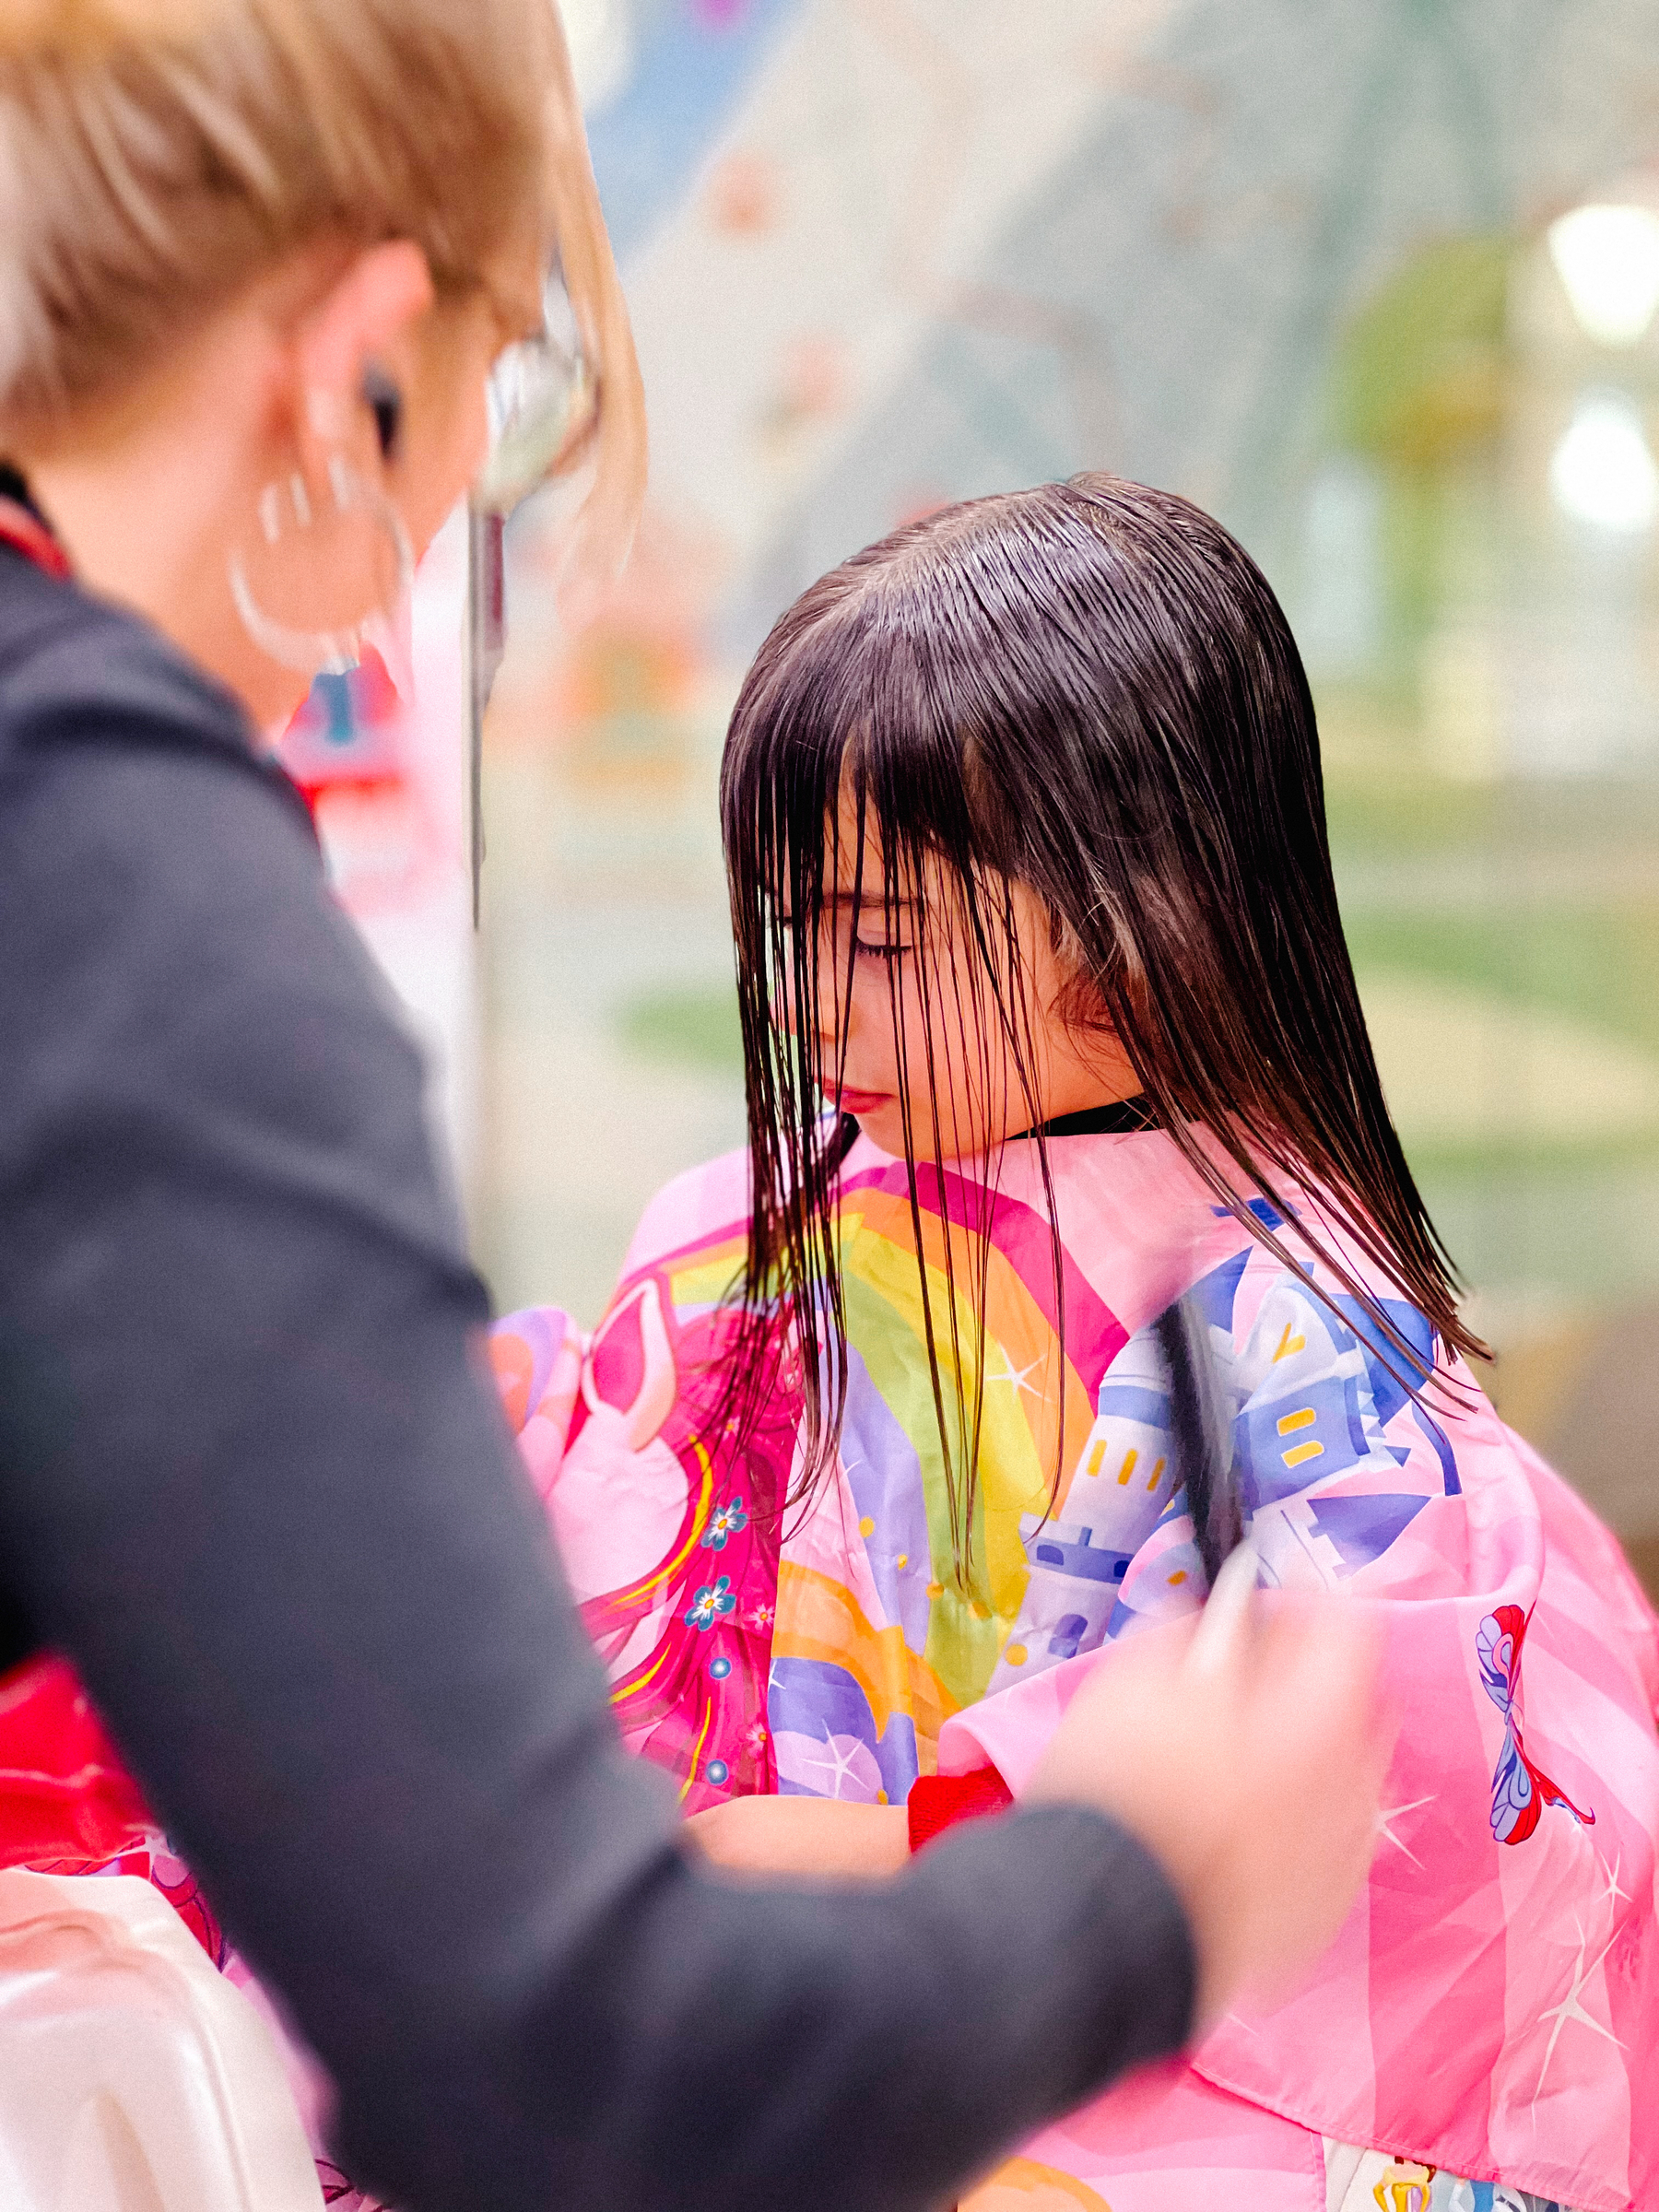 A young child having a haircut, with wet hair covering their face, while a hairstylist works on their hair. The child is wearing a colorful cape with cartoon designs.